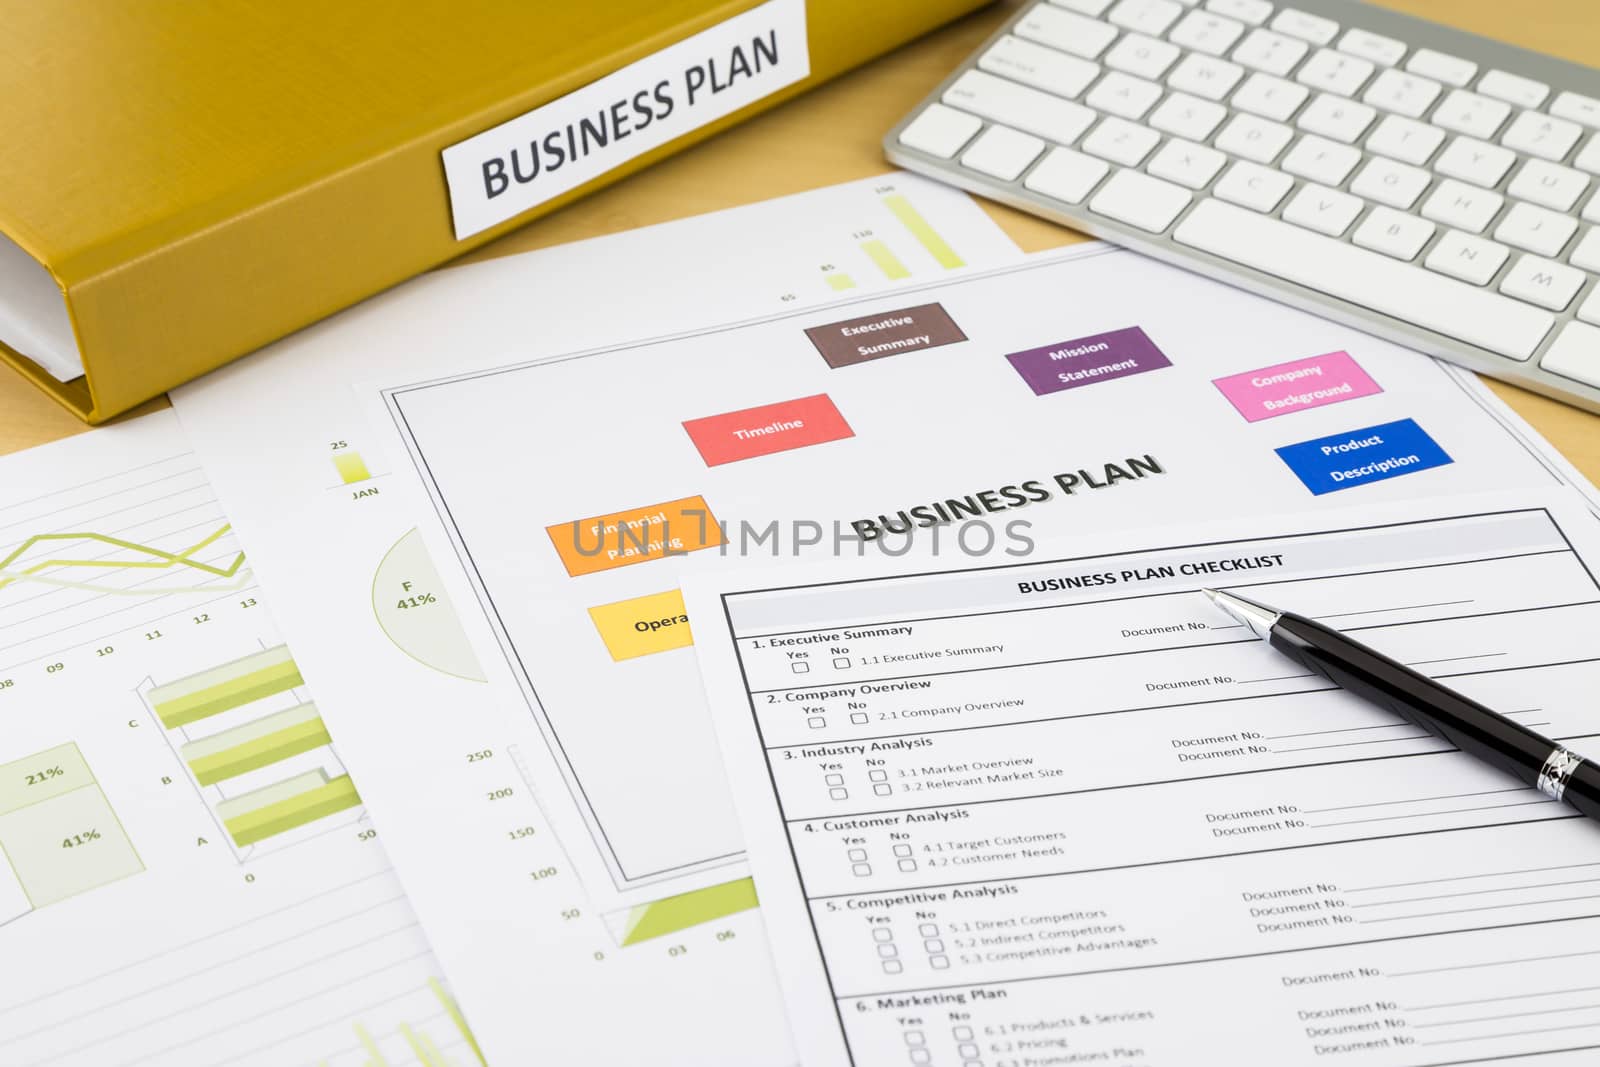 Business plan checklist and documents place on workspace